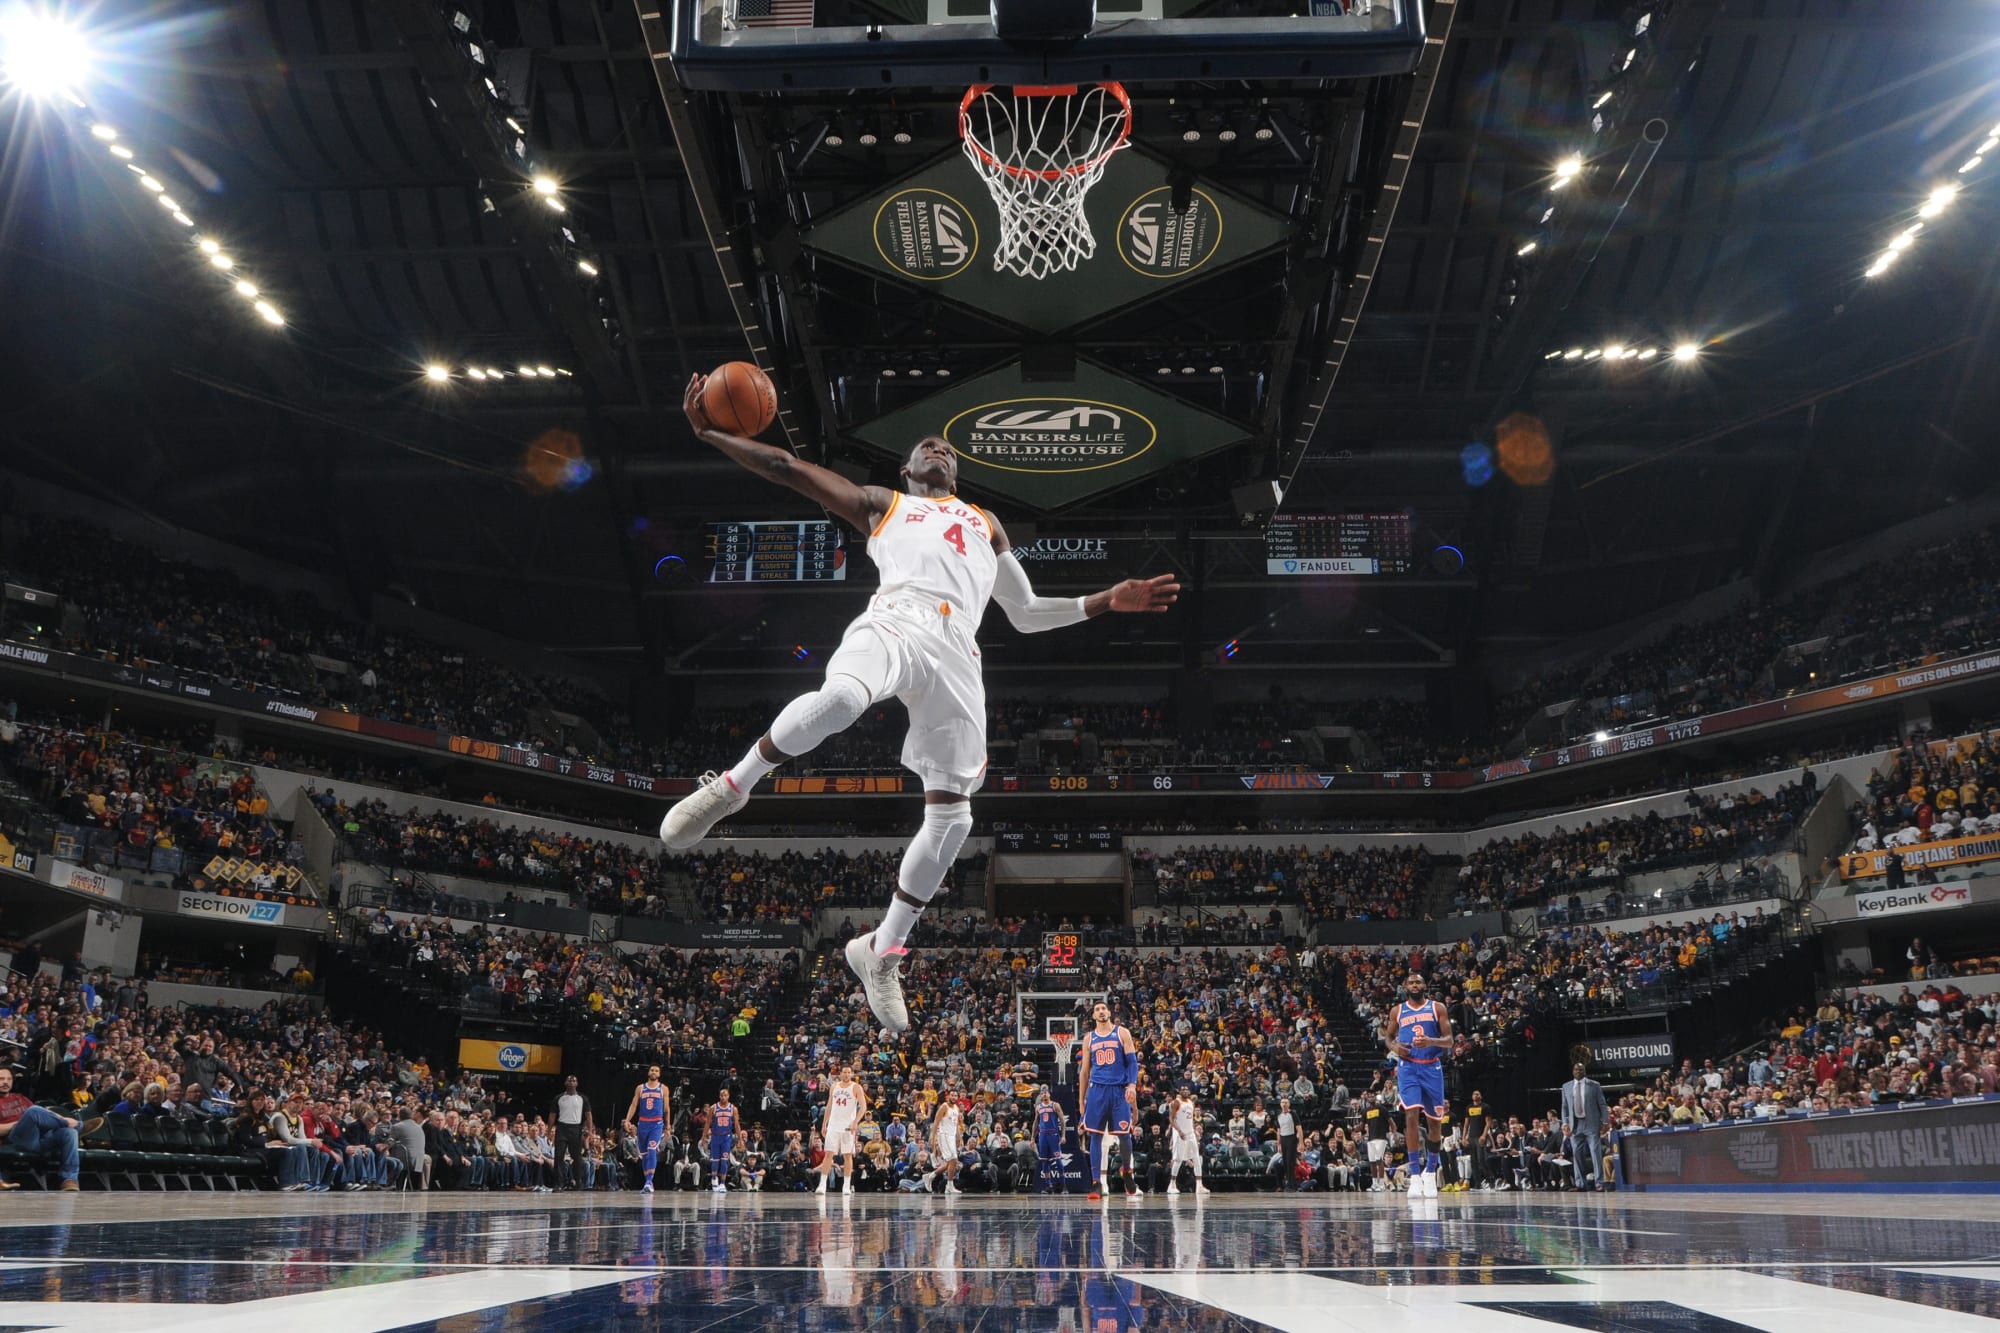 Nba All Star 18 Verizon Slam Dunk Contest Results And Review